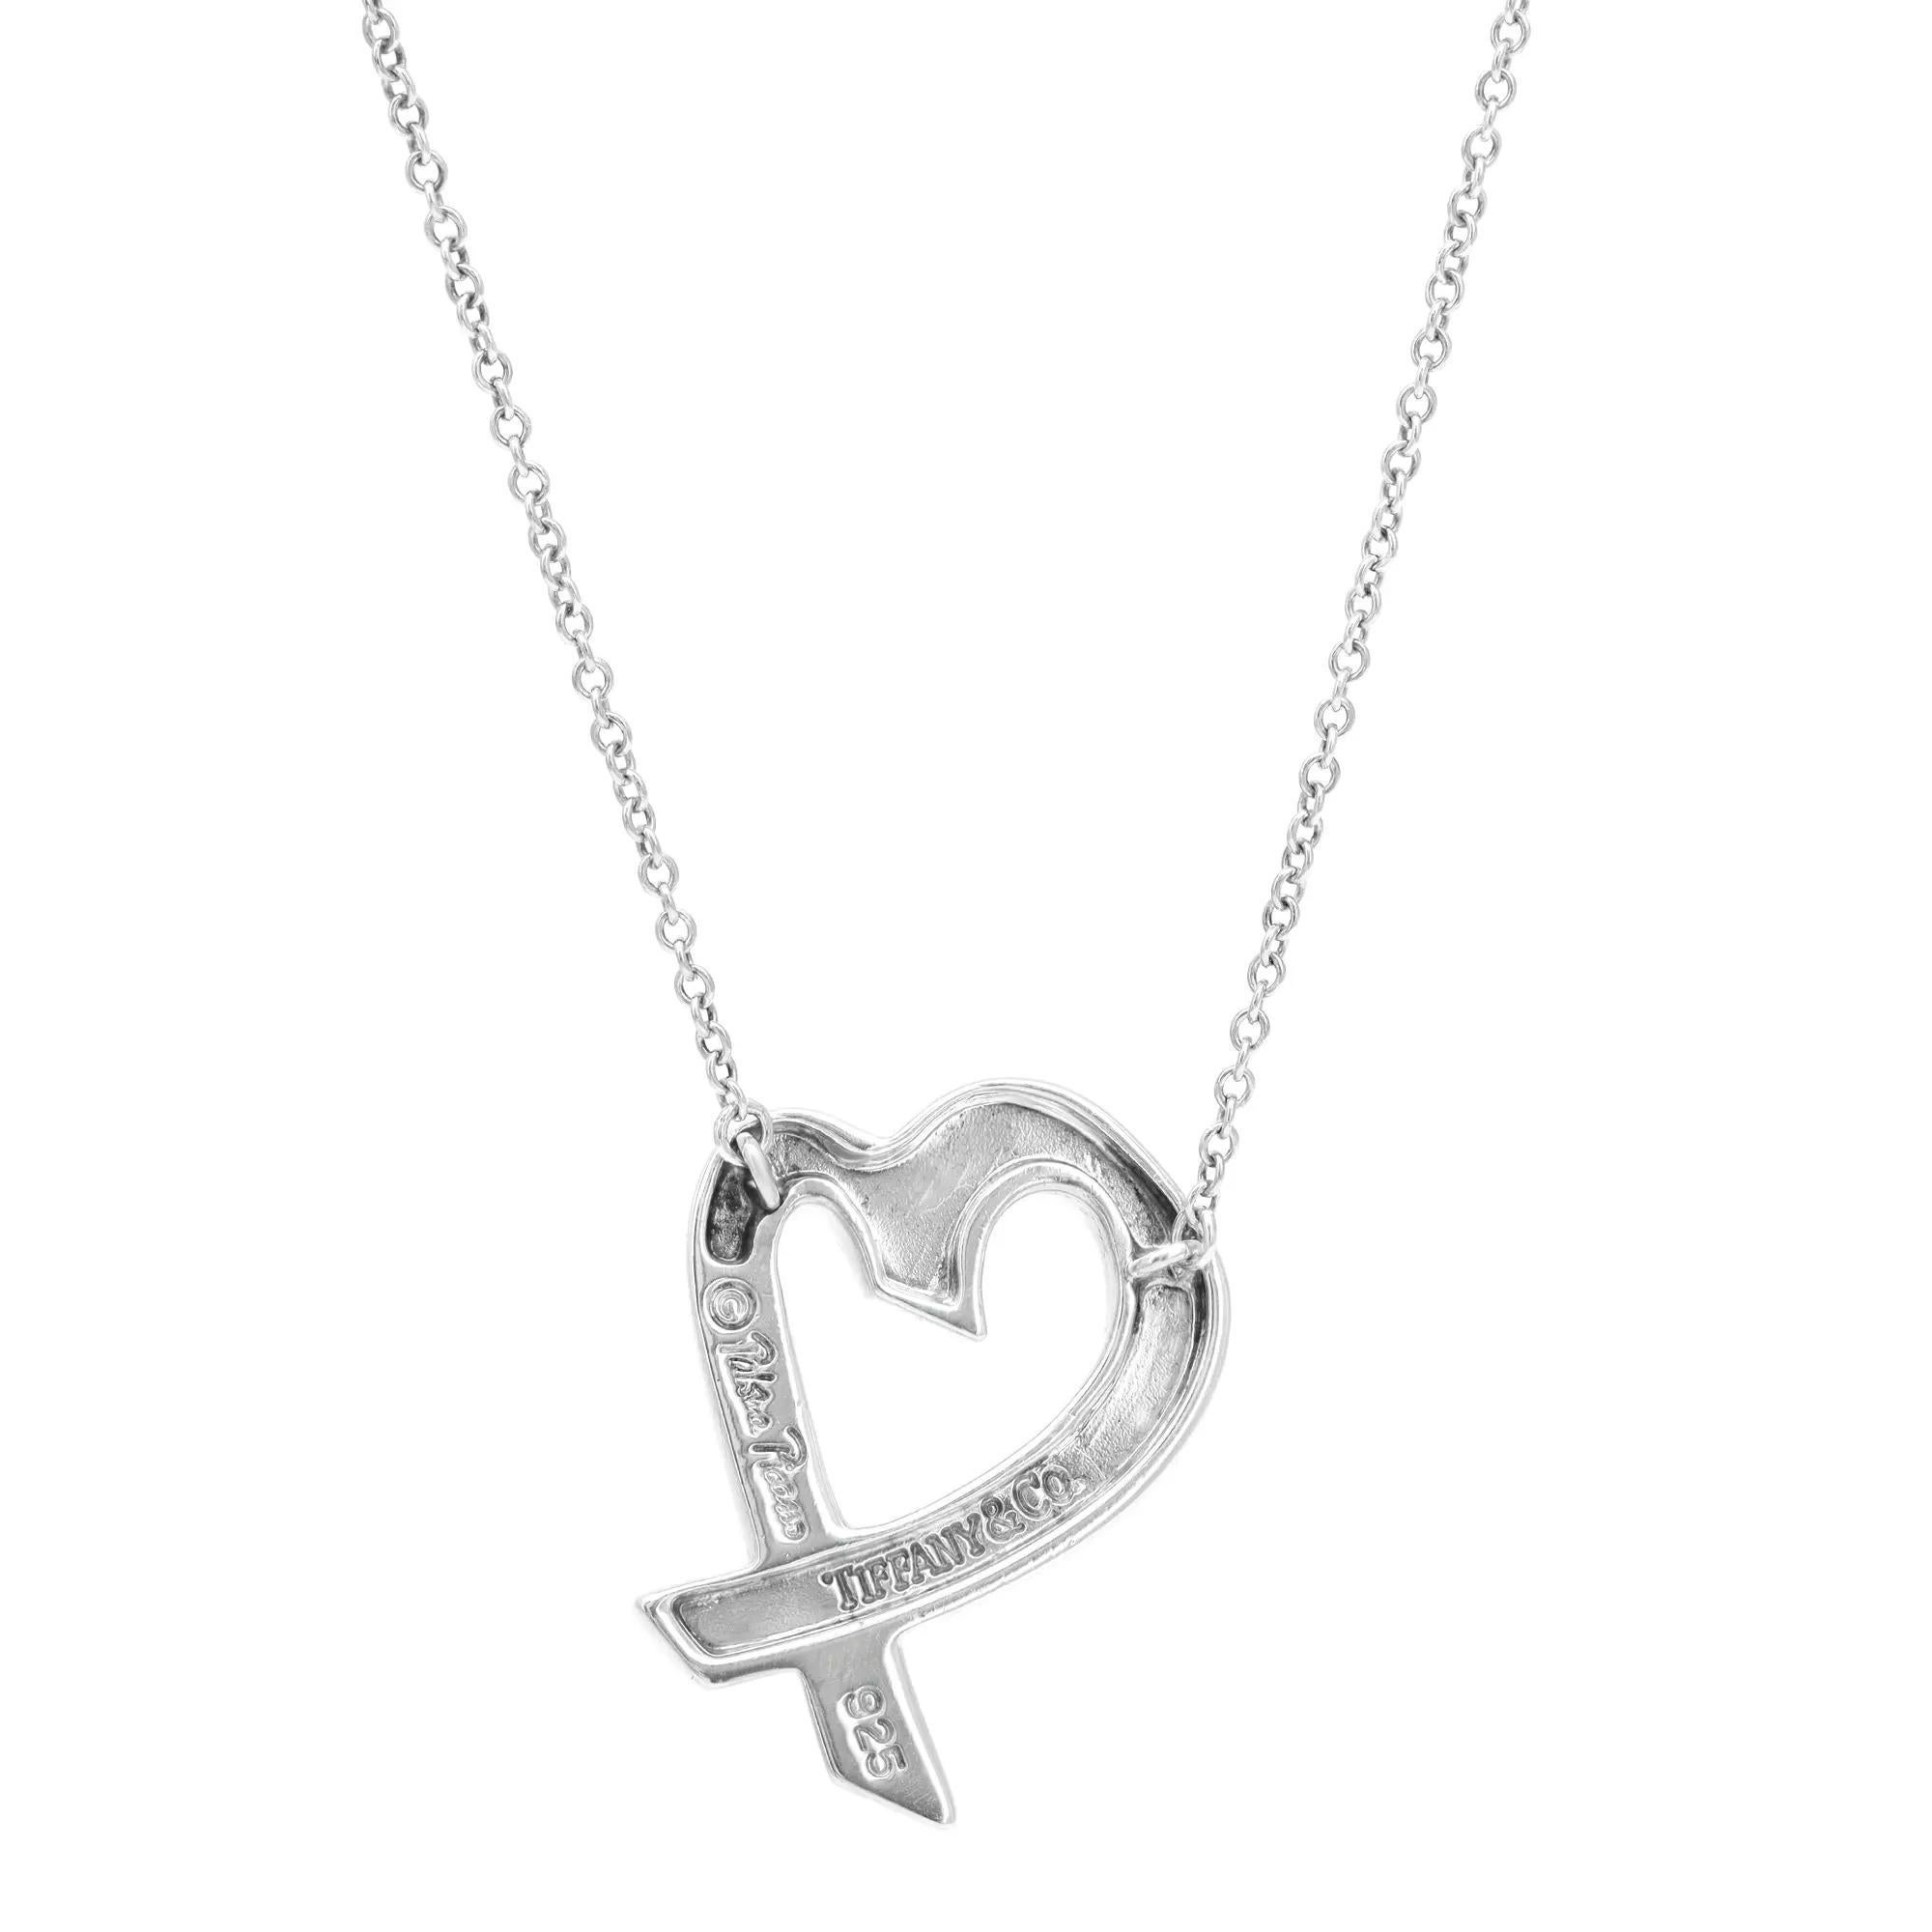 Tiffany & Co Paloma Picasso diamond heart pendant necklace. From the Loving Heart collection by the designer Paloma Picasso. This necklace features an open-heart pendant with a thin Cuban link chain. Necklace length: 19 inches. Pendant size: 21mm X